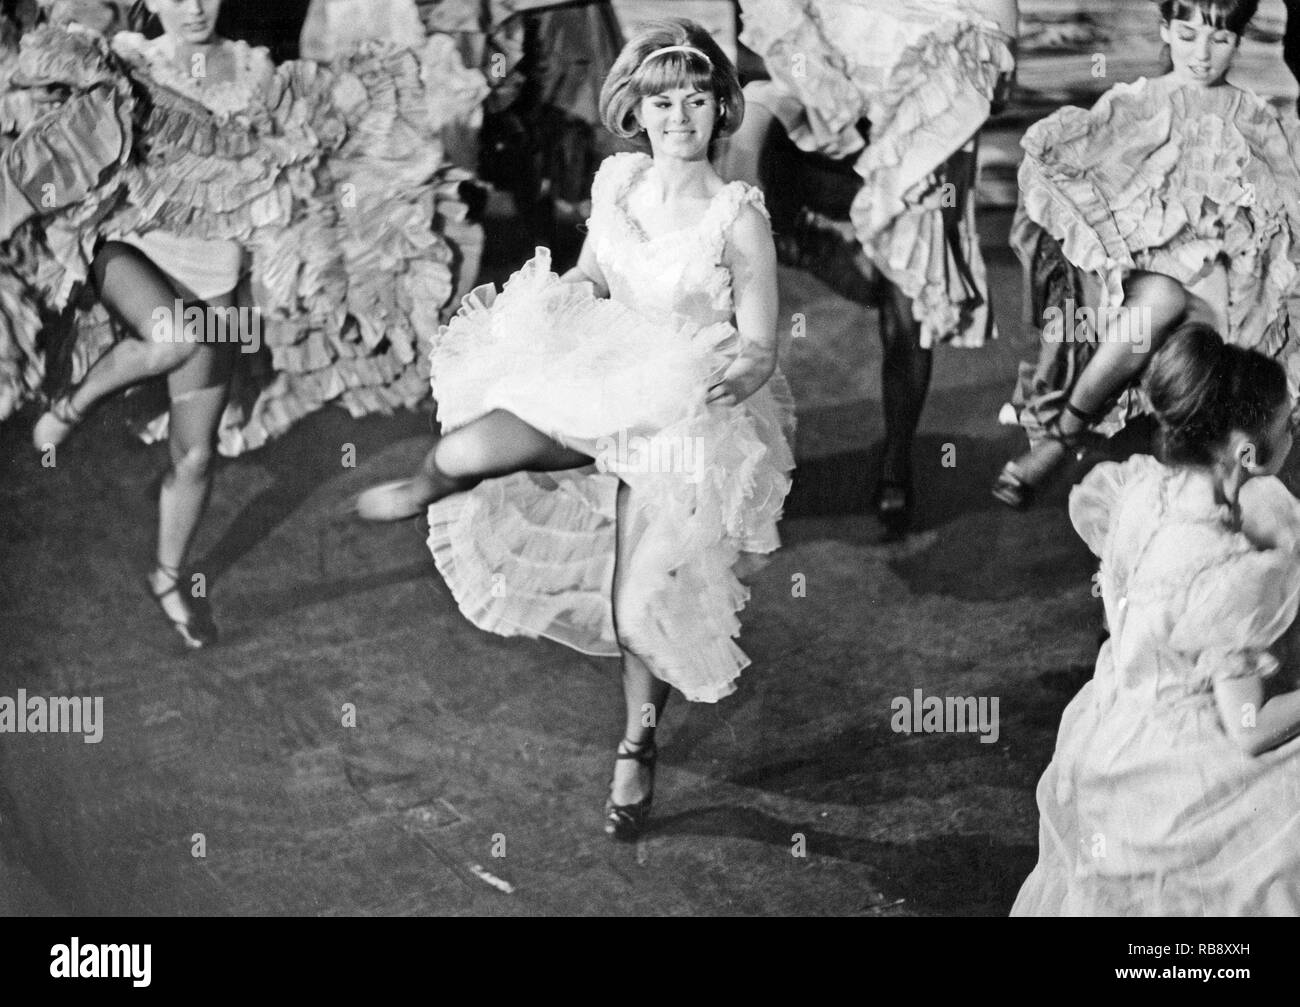 The Can-Can dance. A high-energy, physically demanding dance that became a popular music hall dance in the 1840s, continuing in popularity in French cabaret to this day. The main features of the dance are the vigorous manipulation of skirts and petticoats, along with high kicks, splits and cartwheels. Pictured woman dancing the Can-Can 1966. Sweden Stock Photo